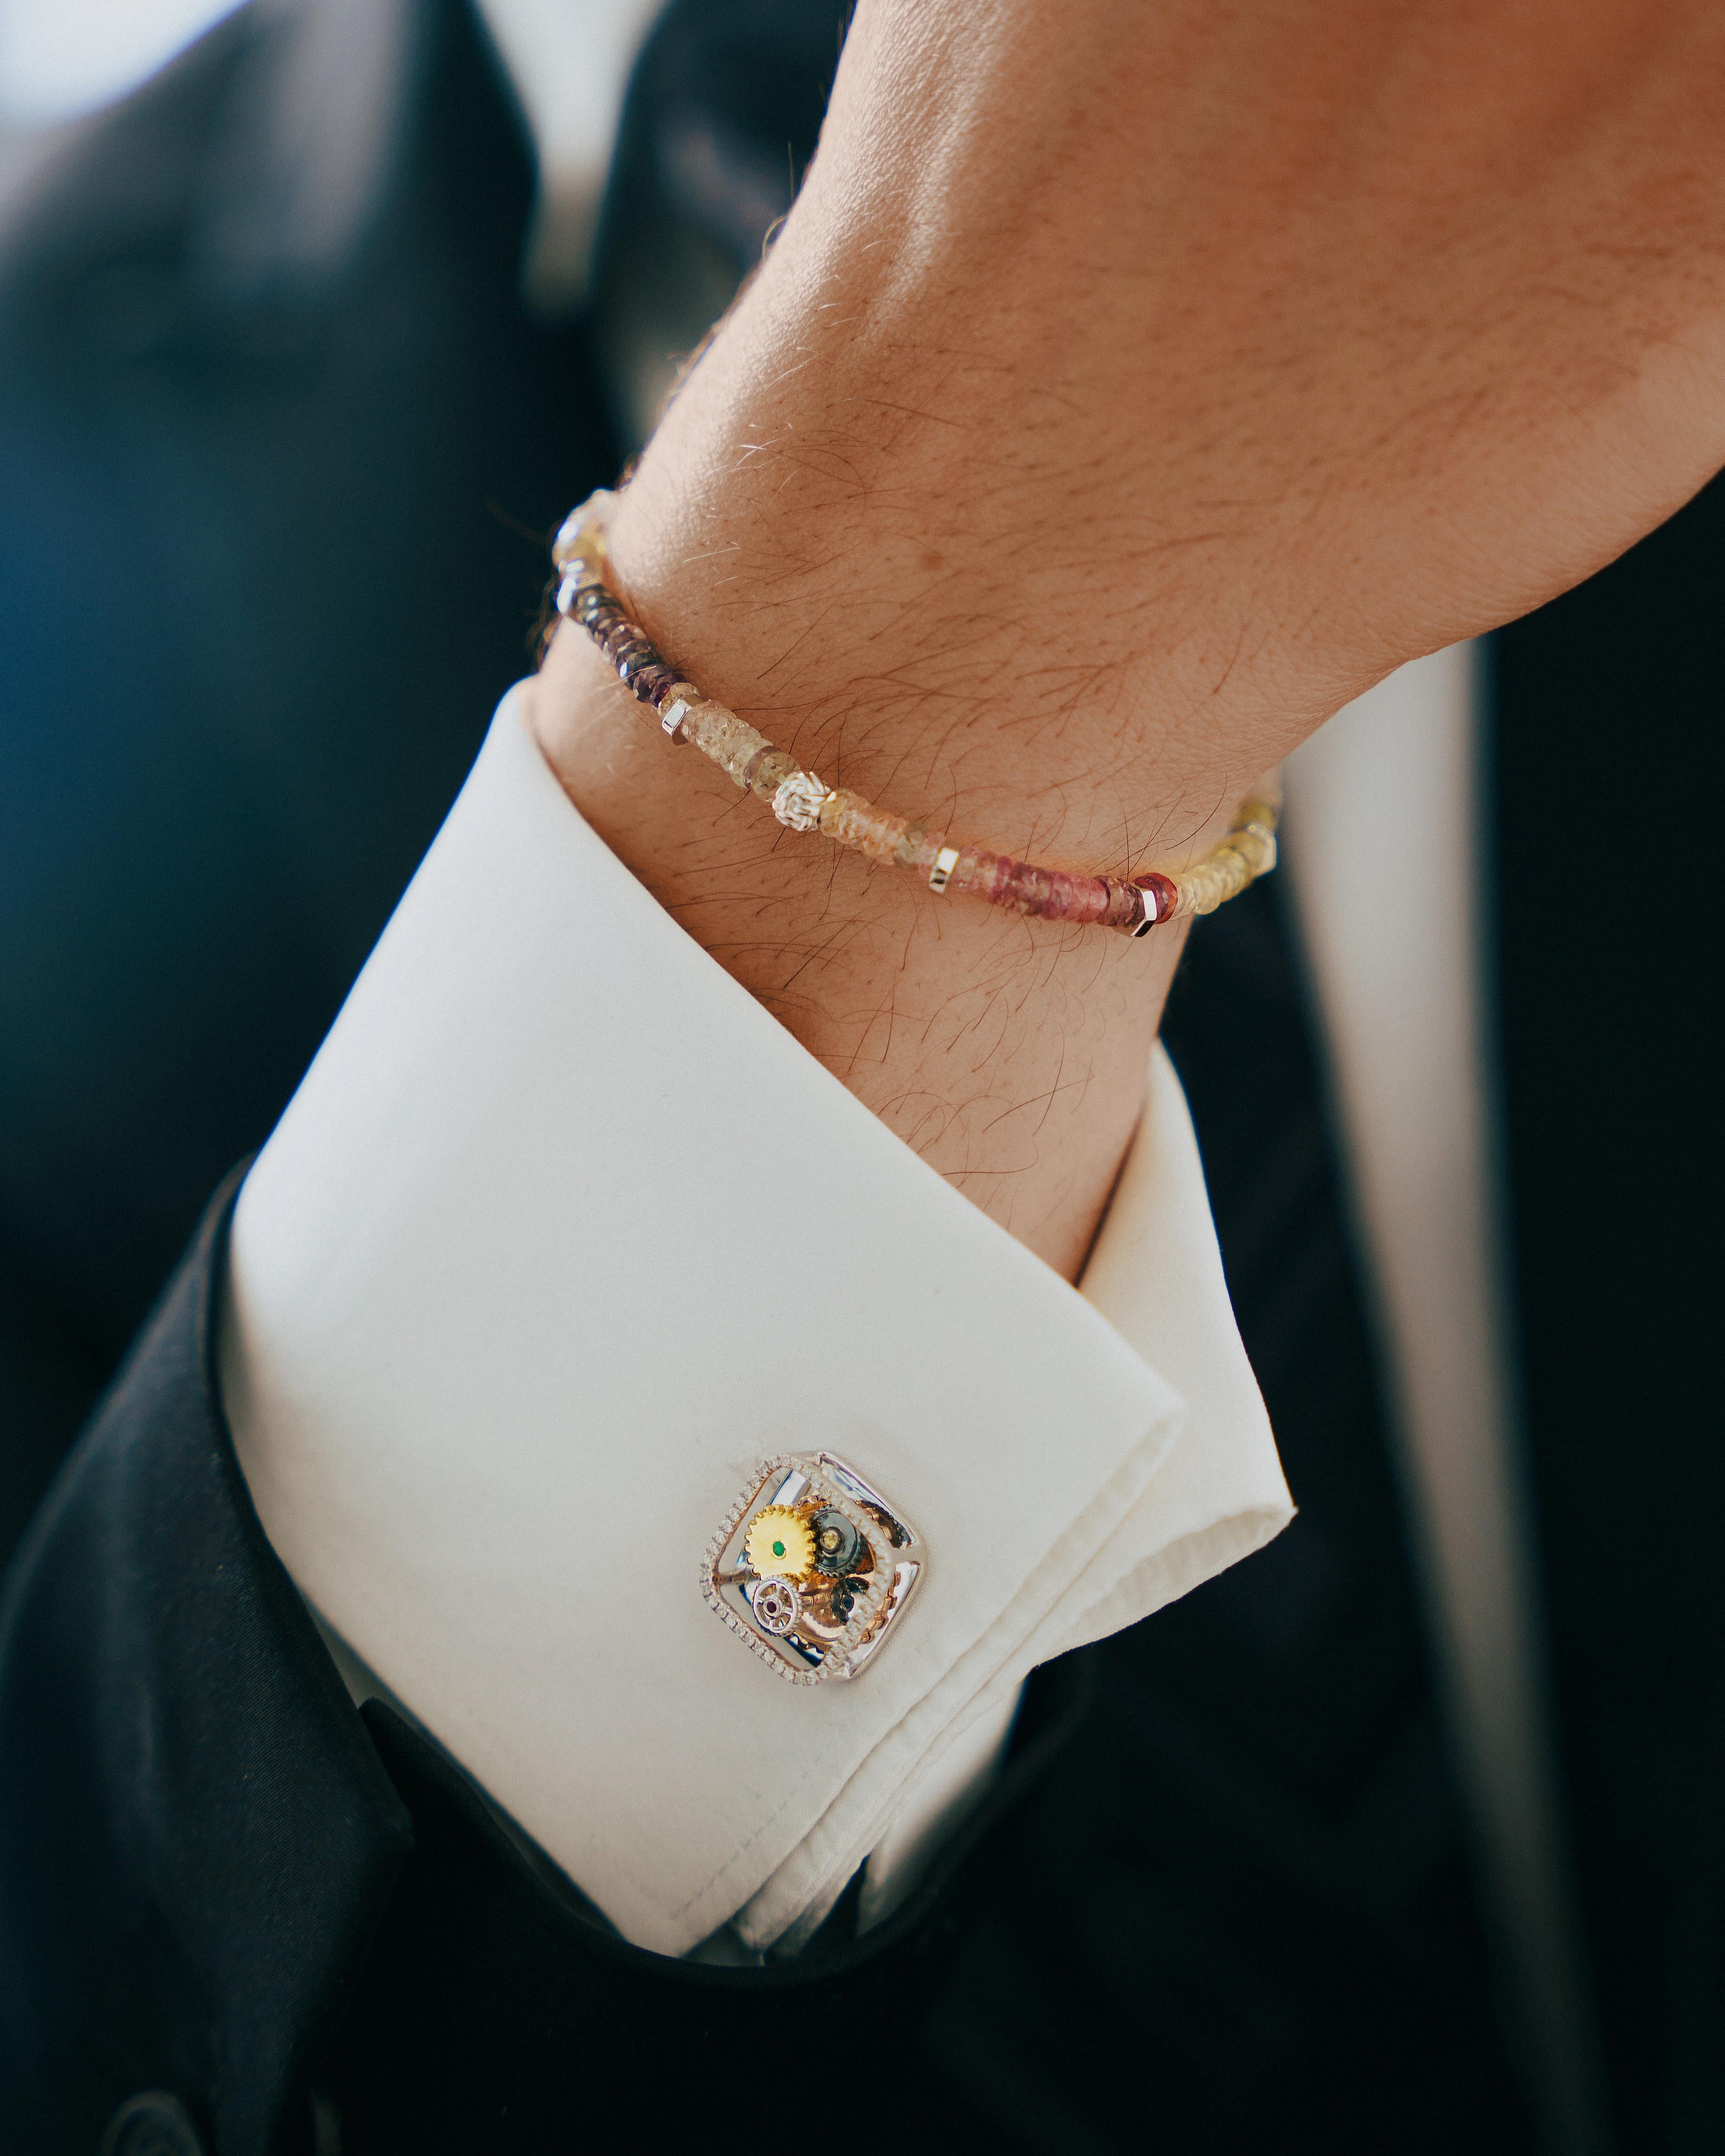 Tateossian continues to explore and find beauty in rare and less traditional precious stones. This hand strung beaded bracelet is made up of multicoloured sopphires for a sparkling rainbow effect. It also features a central silver knot bead and our